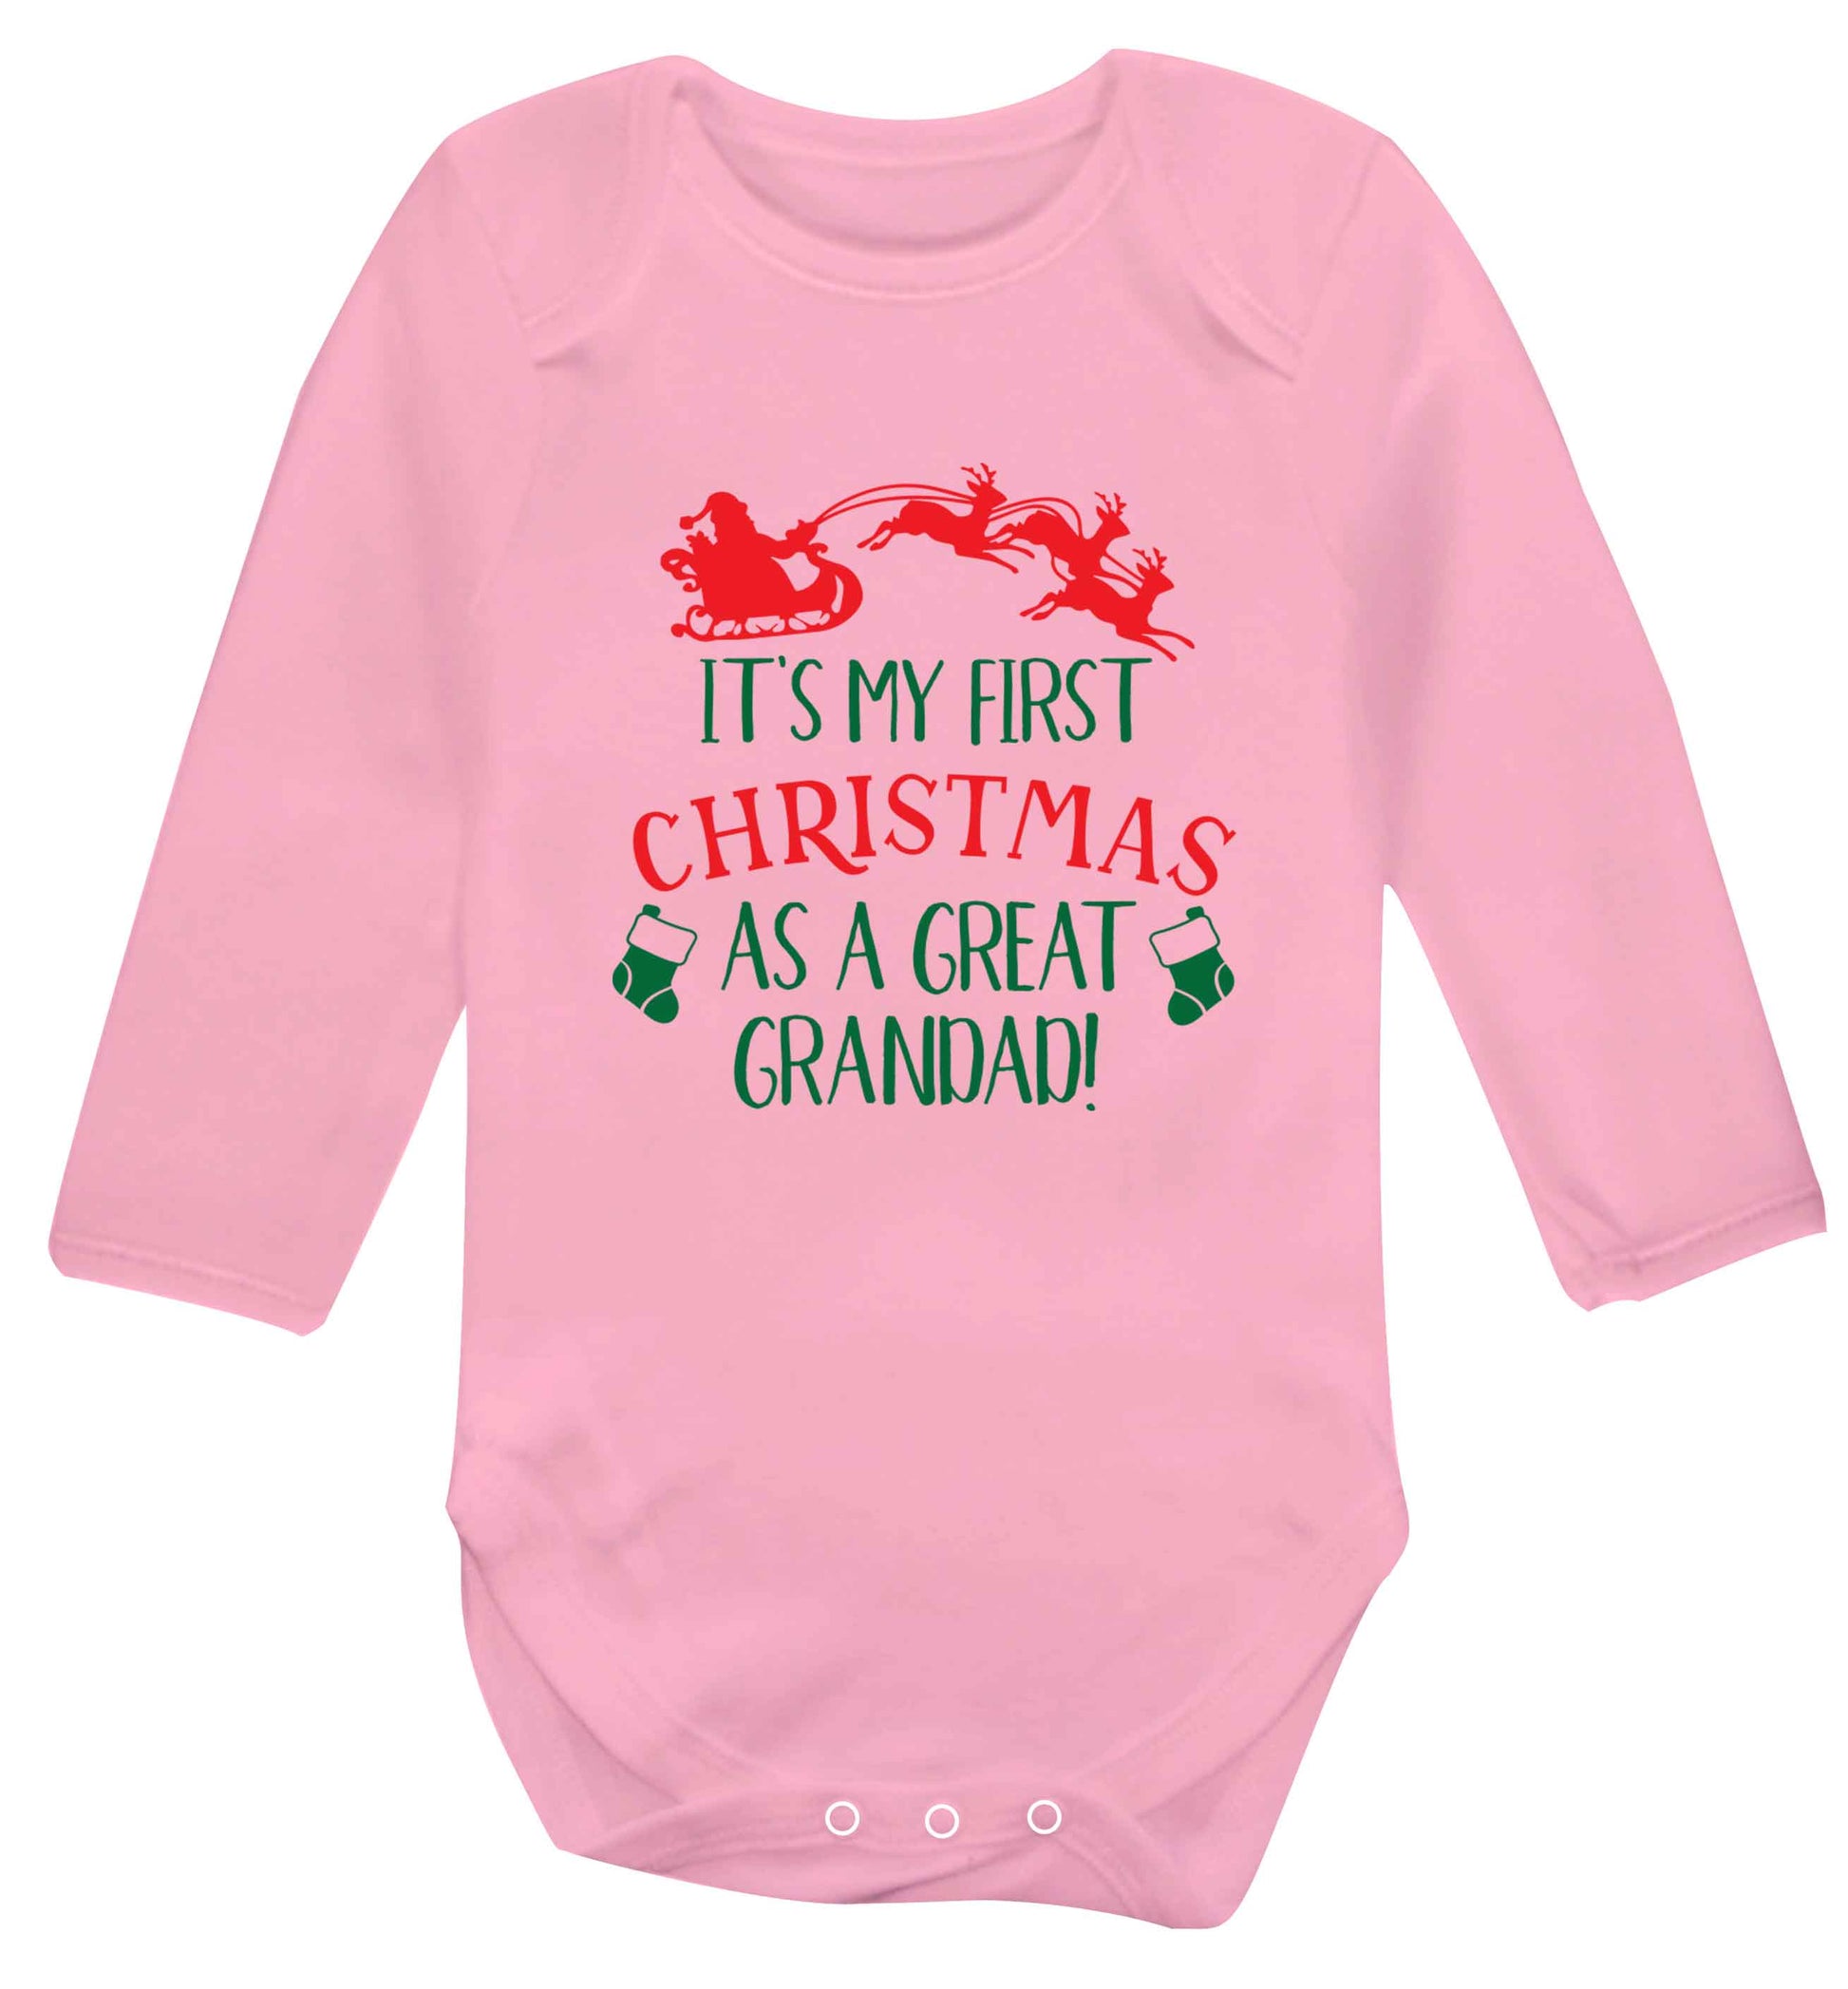 It's my first Christmas as a great grandad! Baby Vest long sleeved pale pink 6-12 months